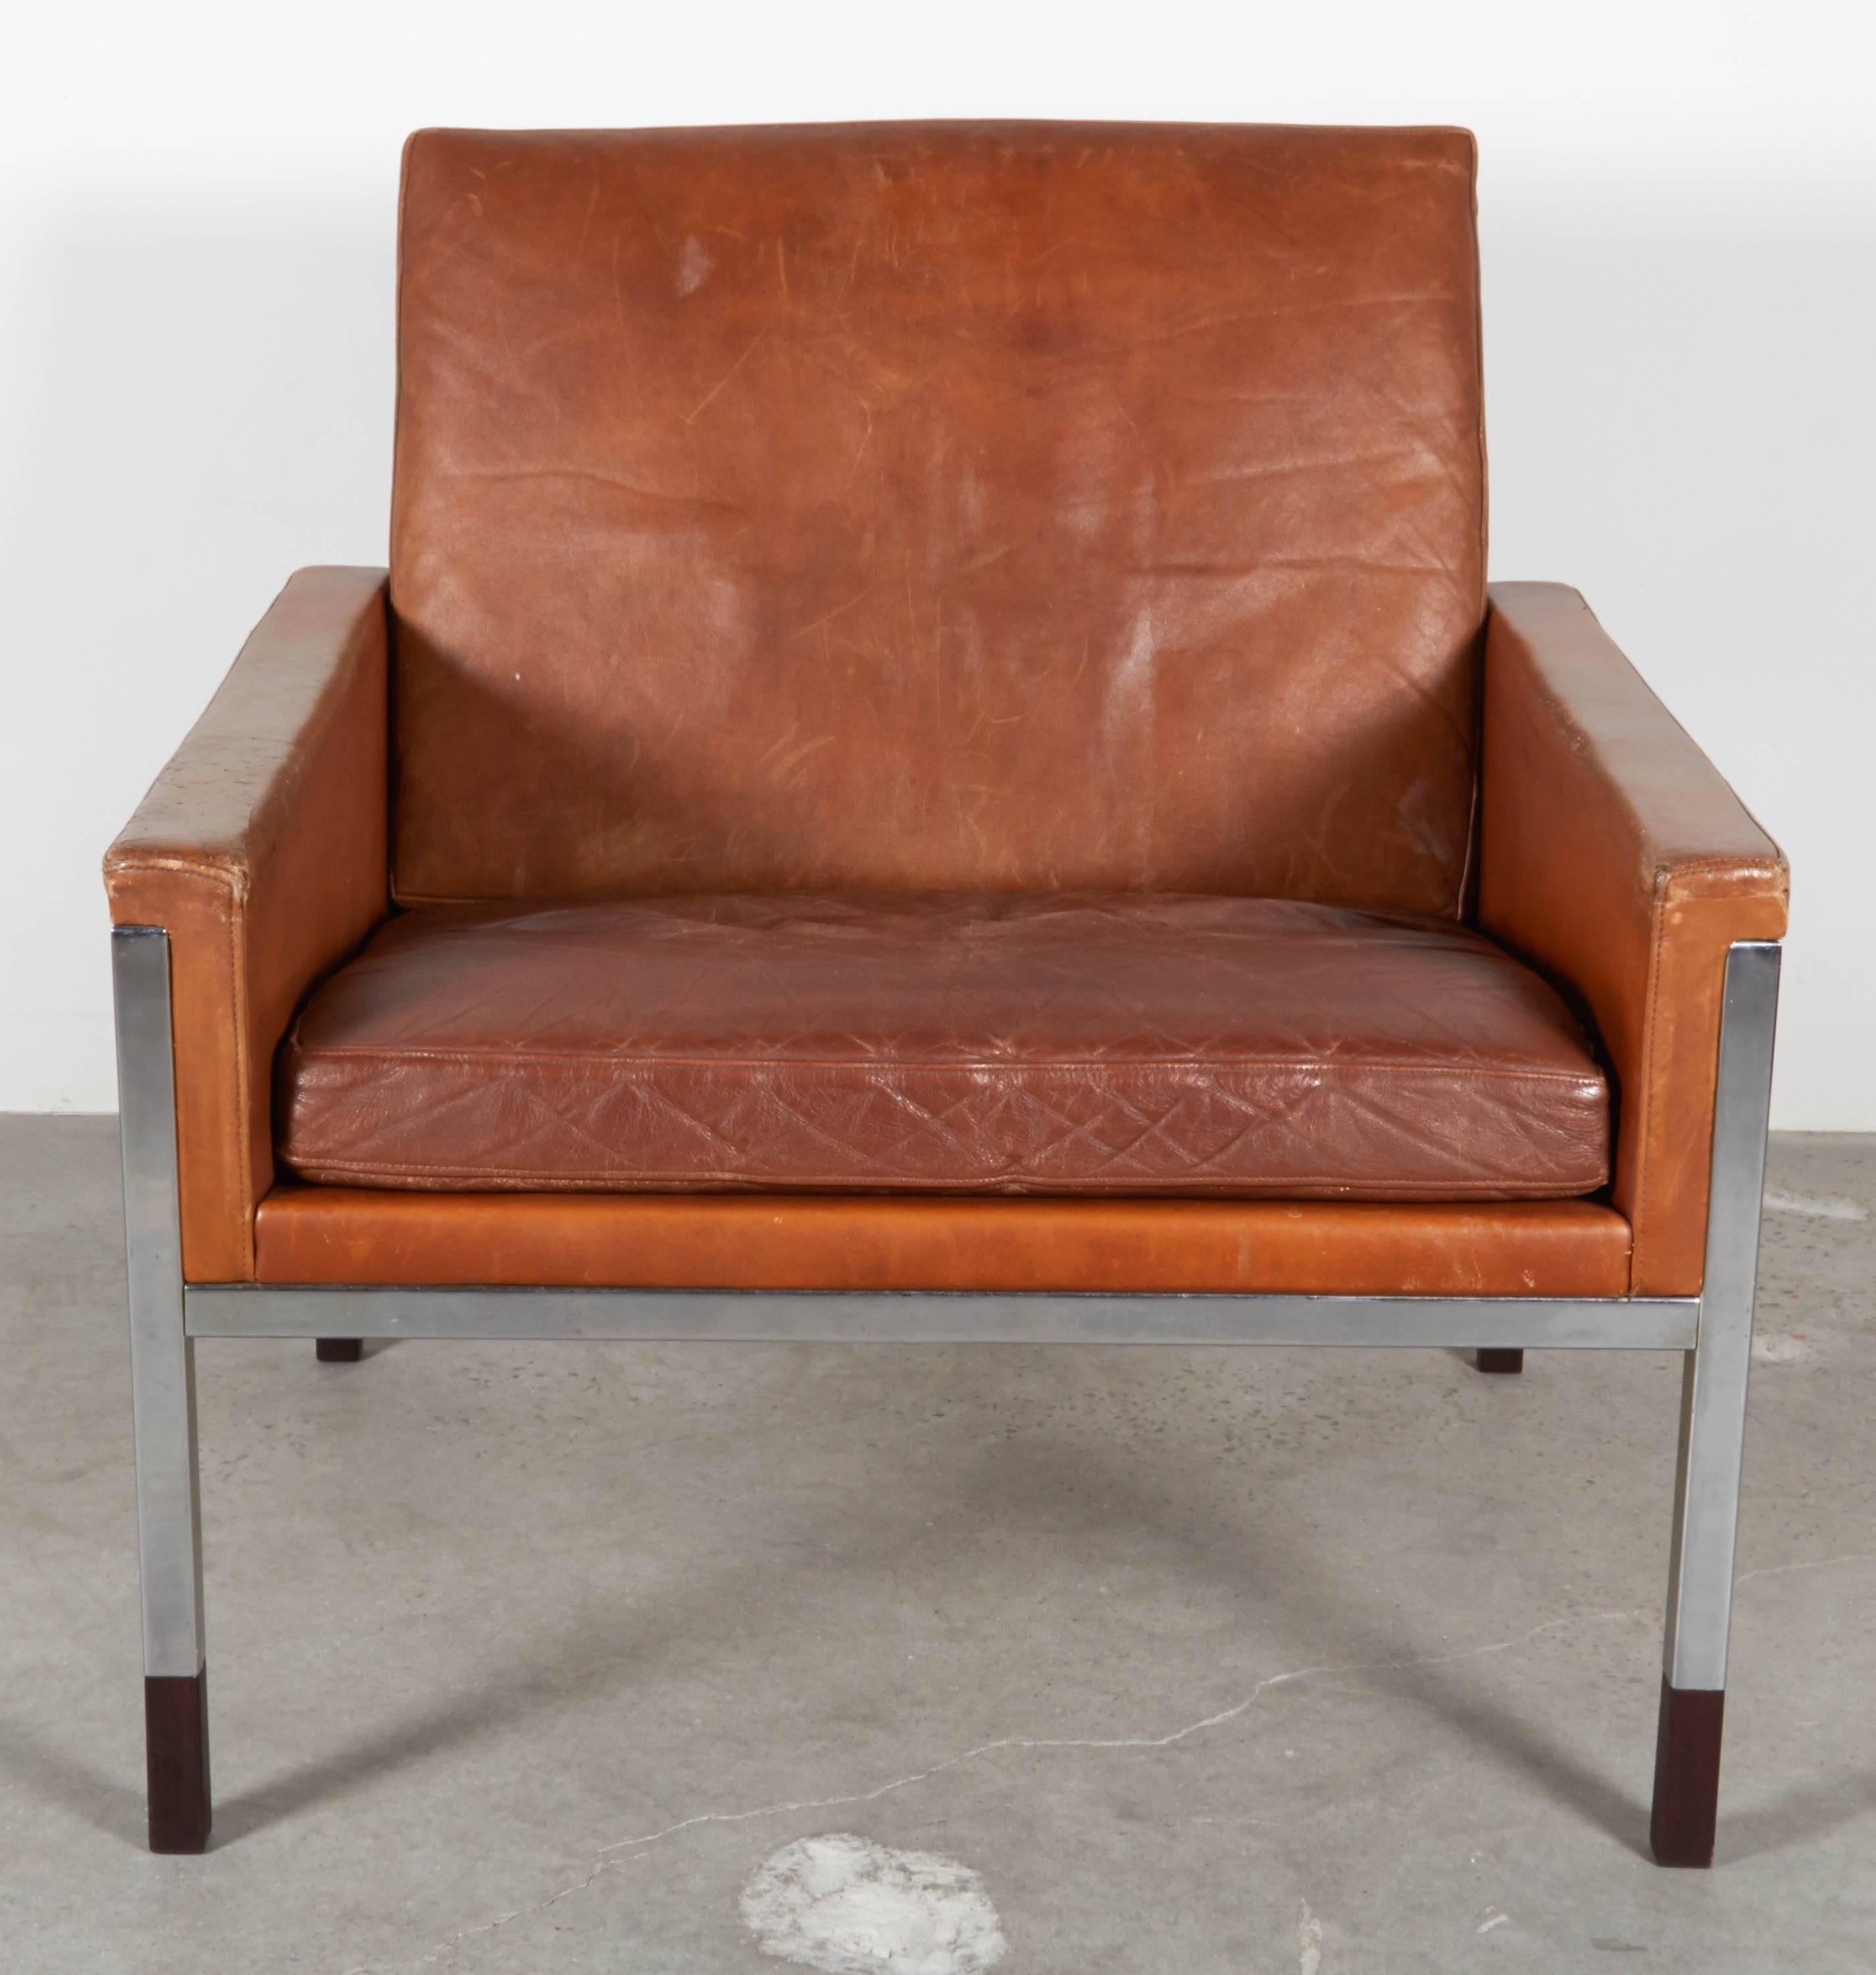 Vintage 1960s Steen Ostergaard Leather Armchair

Very nice armchair designed by Steen Ostergaard in 1961. The leather is original with a nice patina. The frame and wood feet have been restored. Ready for pick up, delivery, or shipping anywhere in